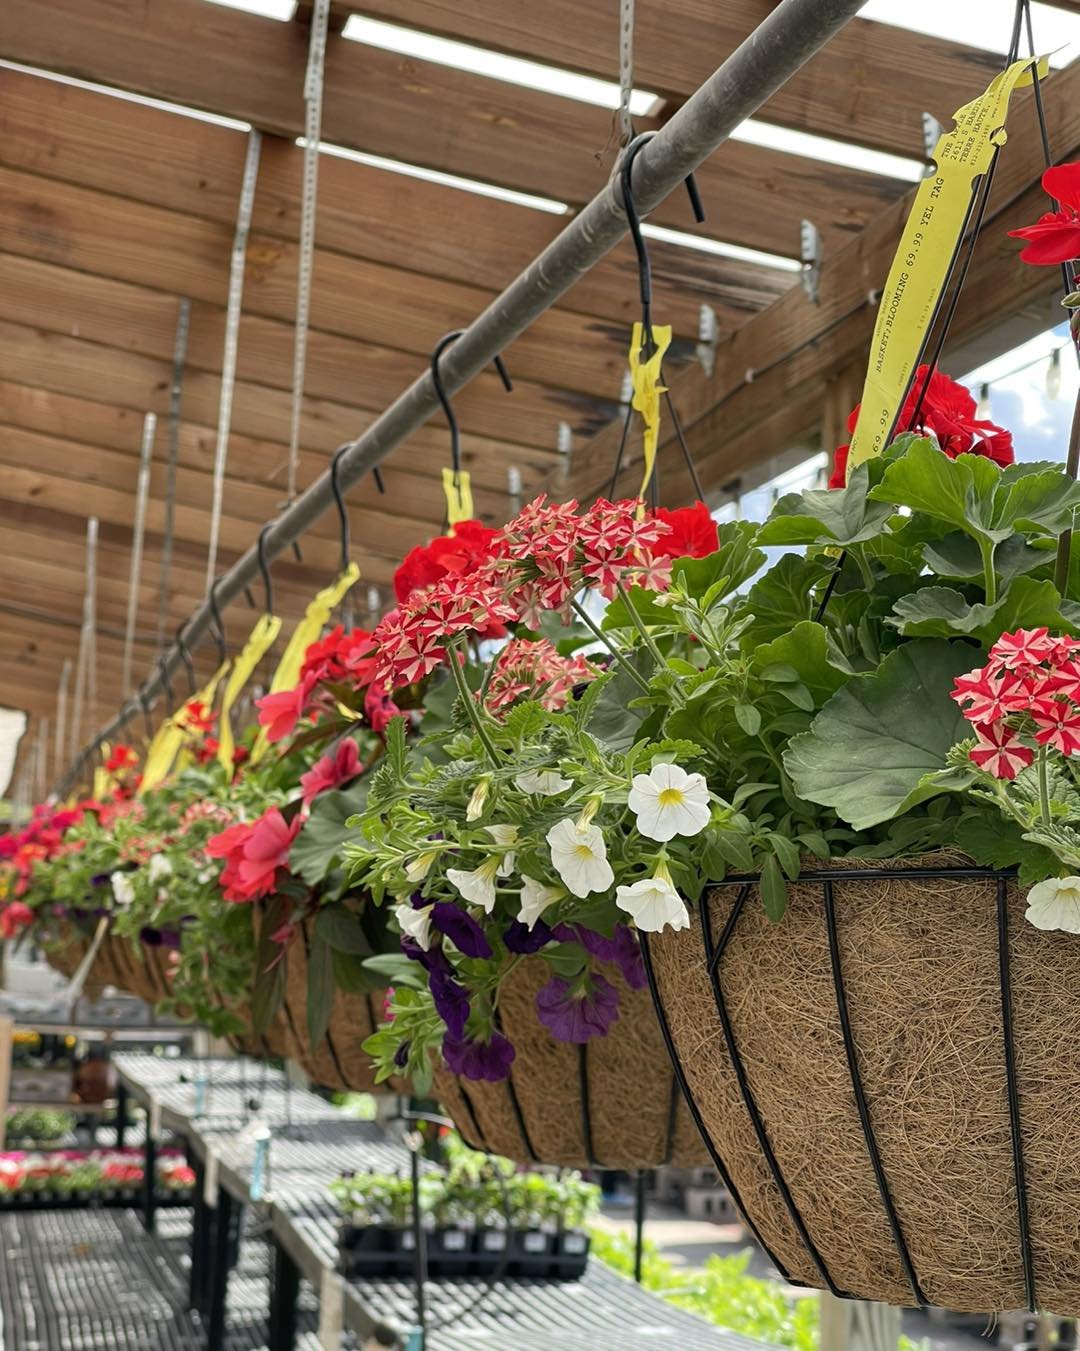 We are weekend ready! 🪻🌸🌷🌿
.
Fresh loads of hanging baskets, bedding plants, herbs, veggies, quart perennials, flowering shrubs and more are in!
.
#springishere